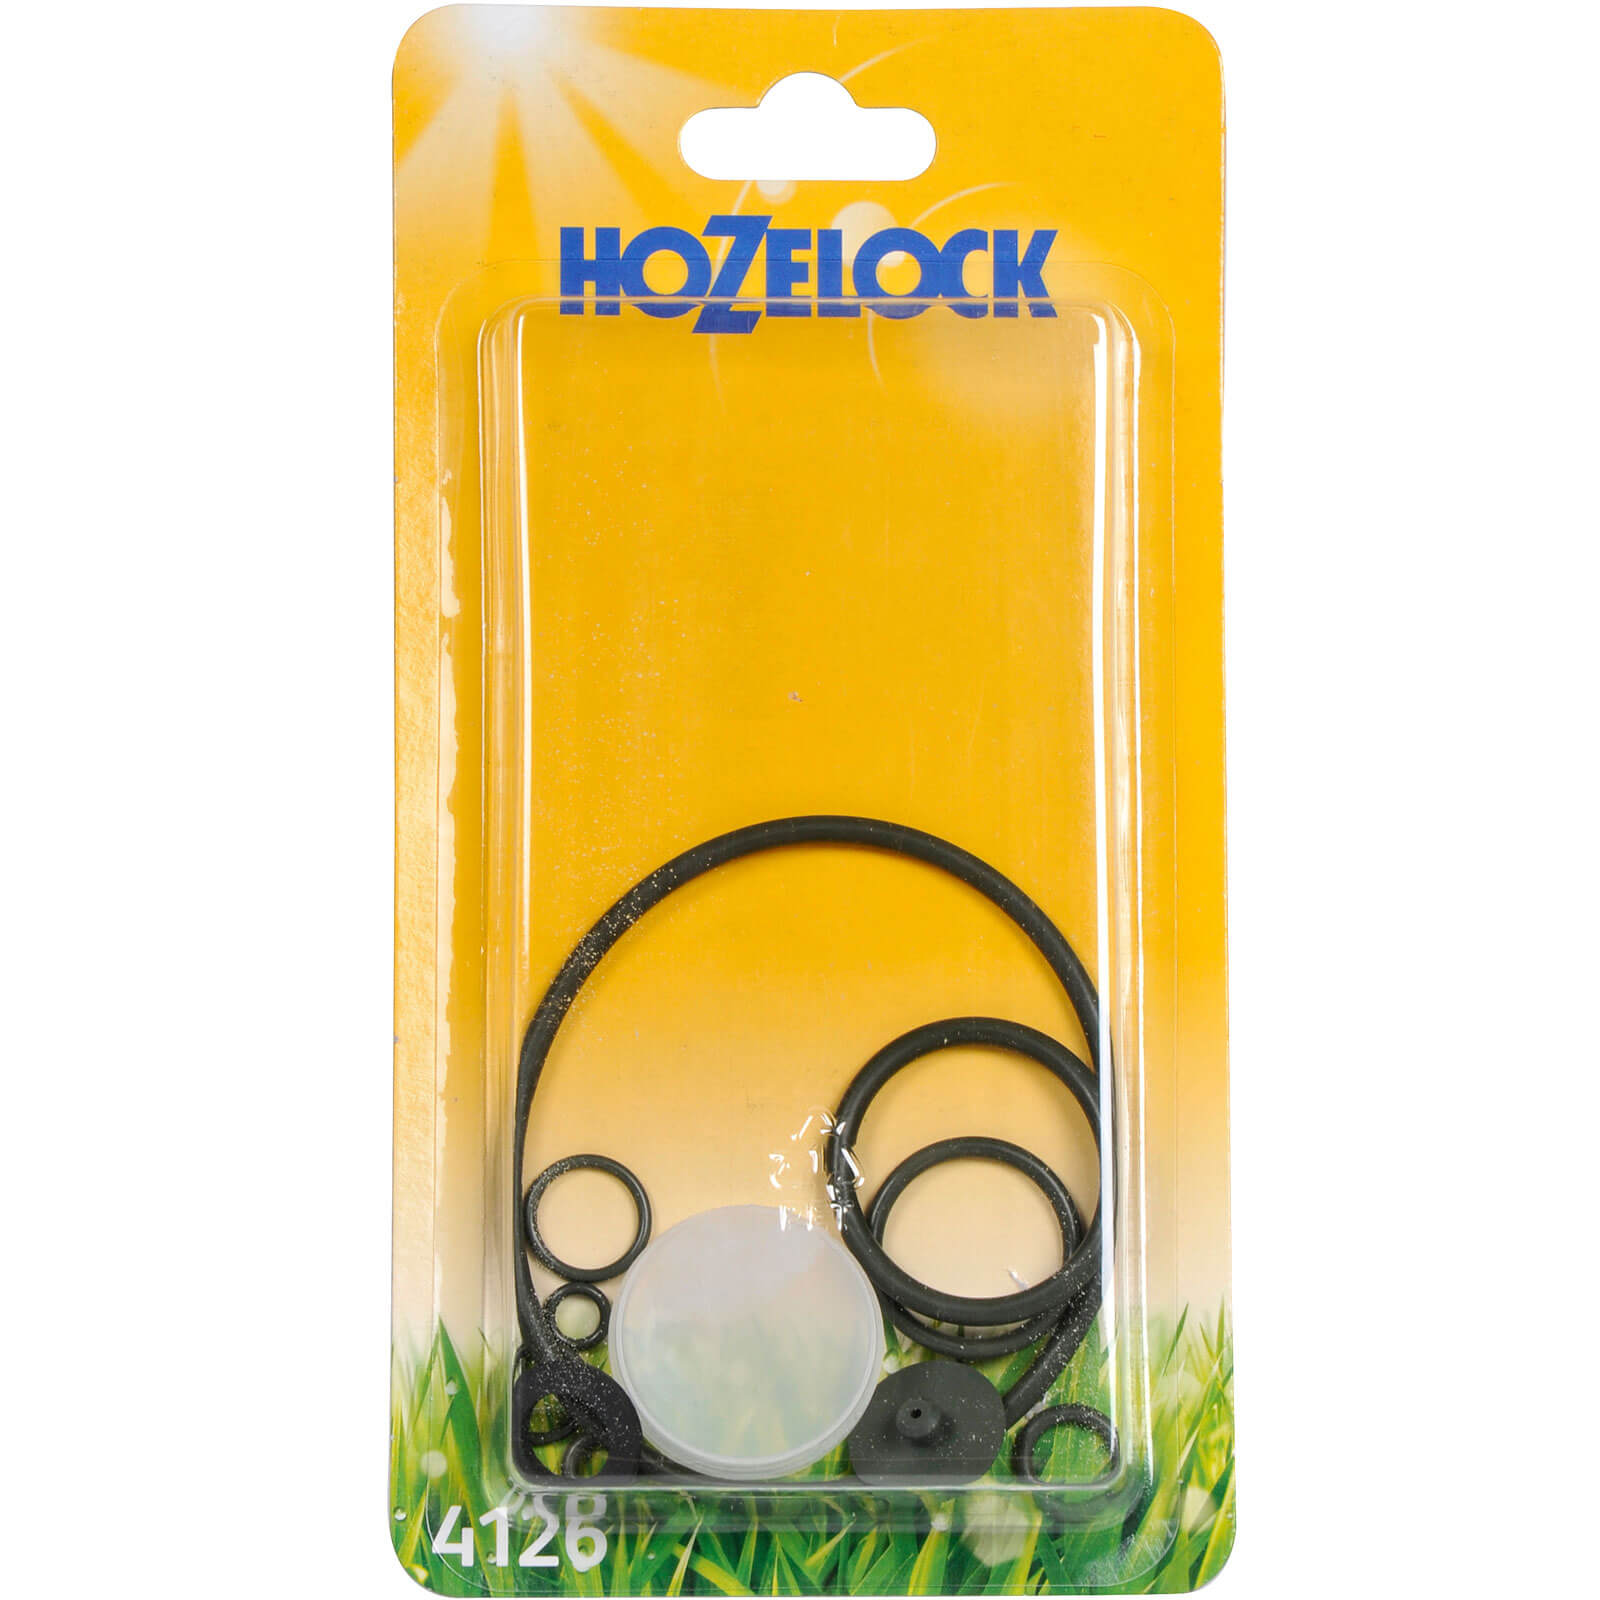 Image of Hozelock Annual Service Kit for Pro and Viton Pressure Sprayers